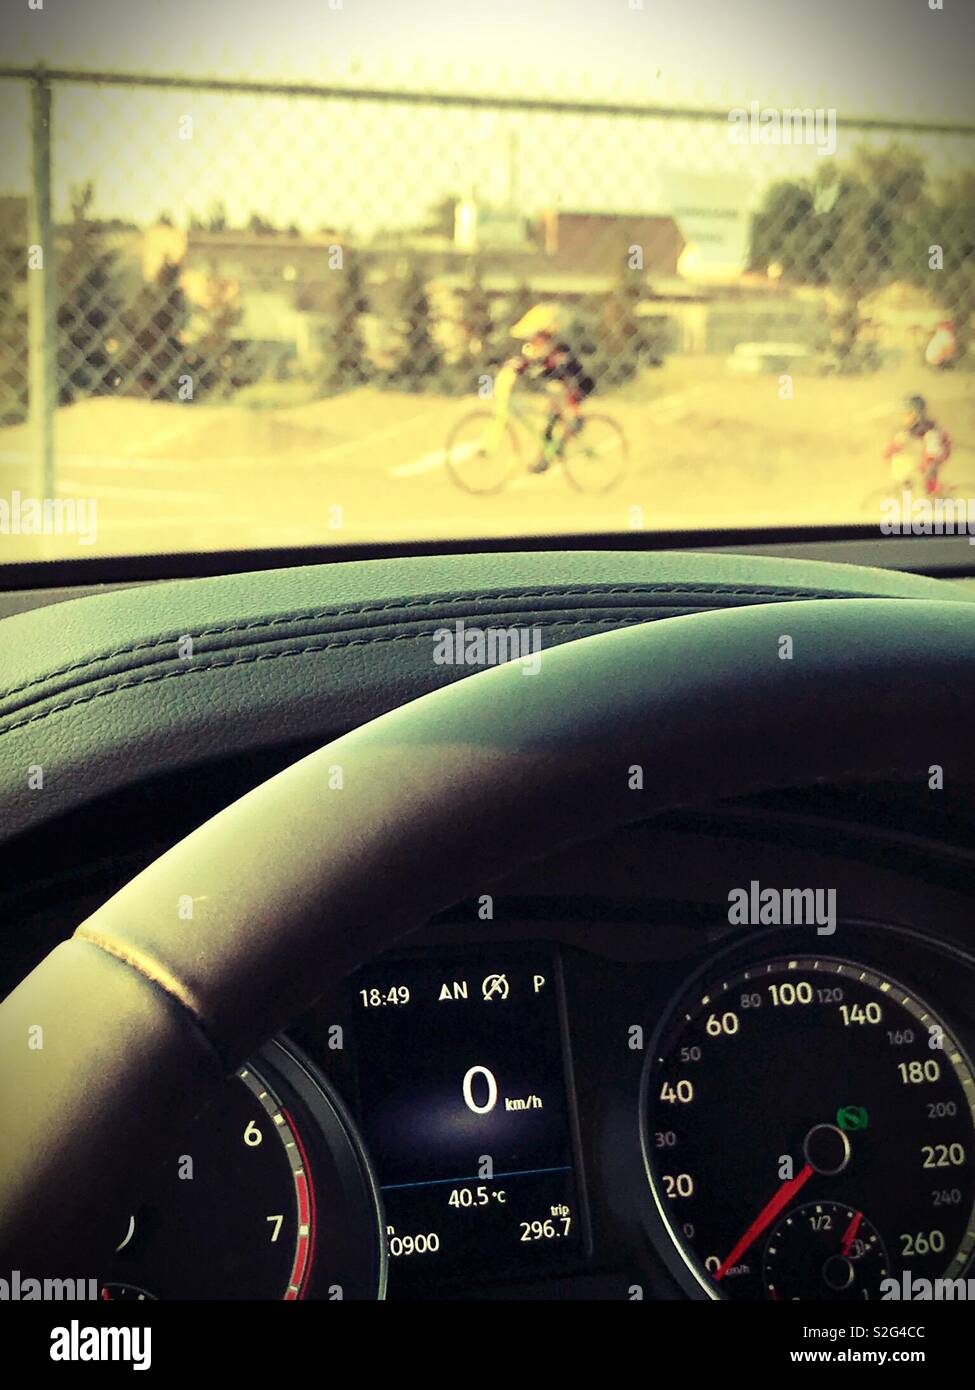 Kids race in full protective gear on a BMX track, viewed from a vehicle with the temperature gauge showing the outside temperature at 40.5 degrees Celsius. Stock Photo